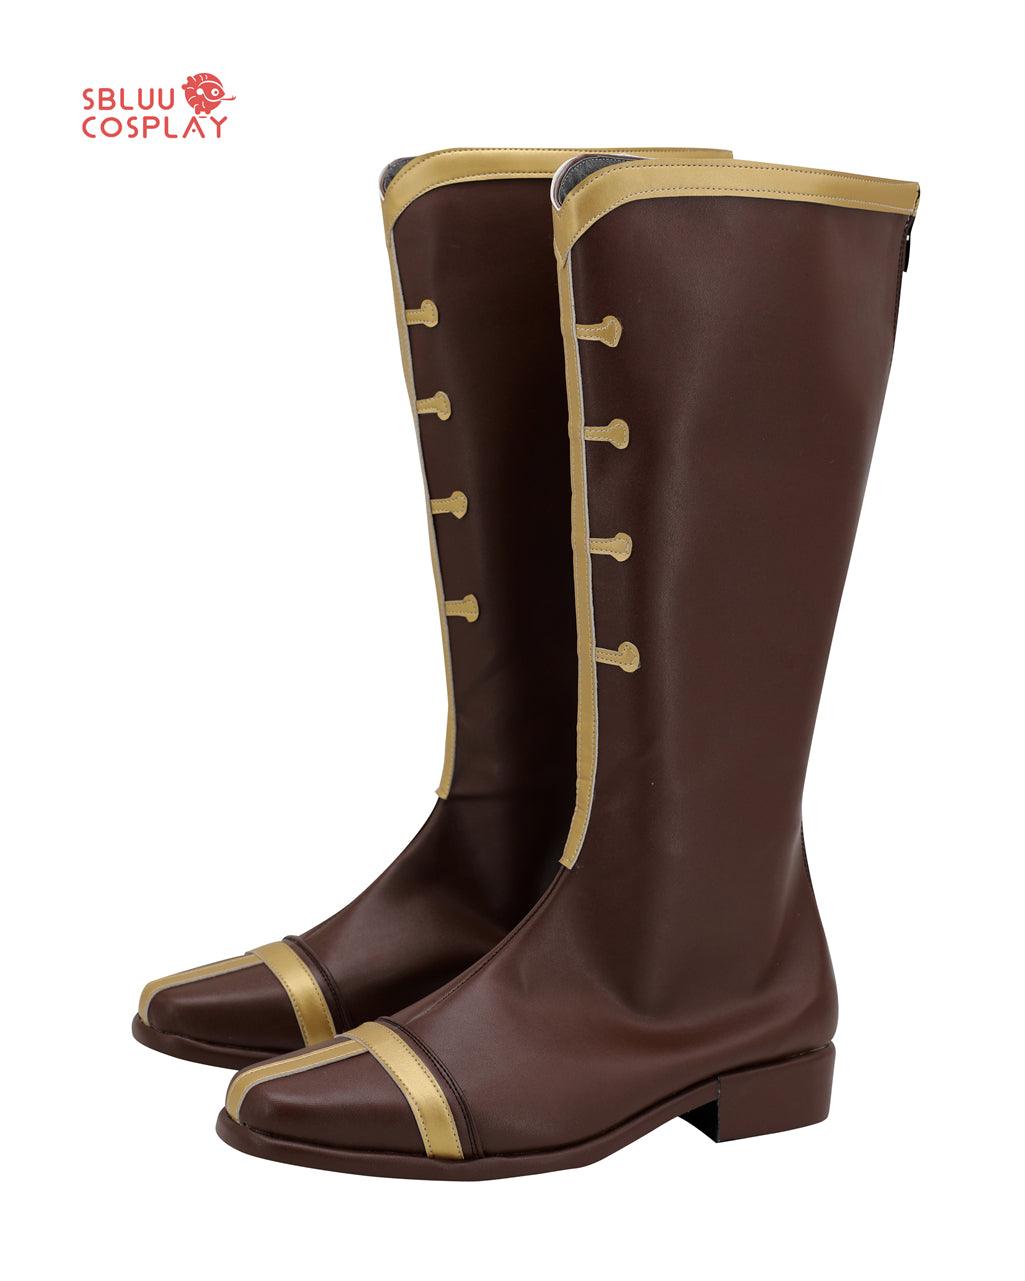 Overlord Mare bello fiore Cosplay Shoes Custom Made Boots - SBluuCosplay